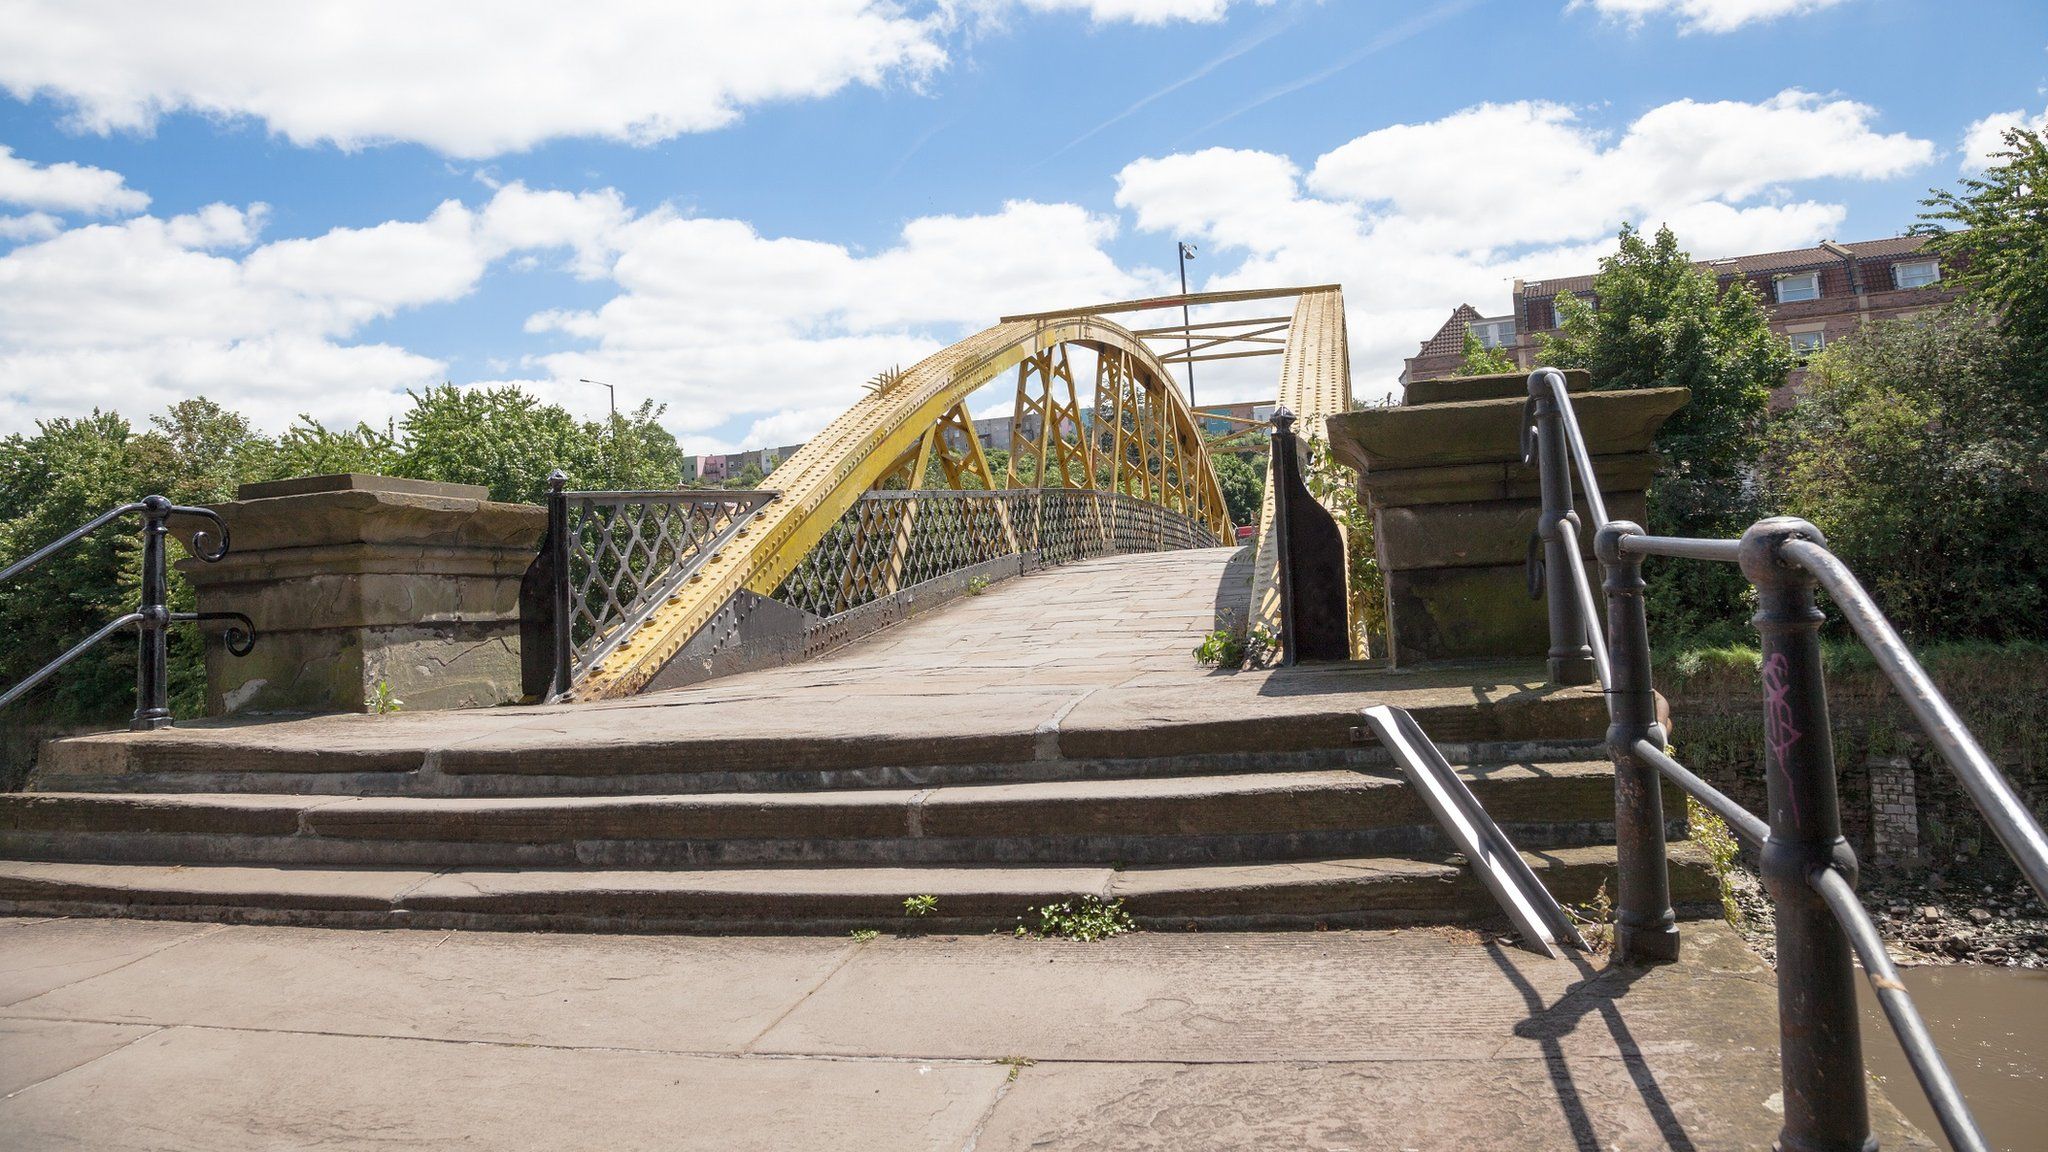 The steps leading to the Banana Bridge over the River Avon in Bristol